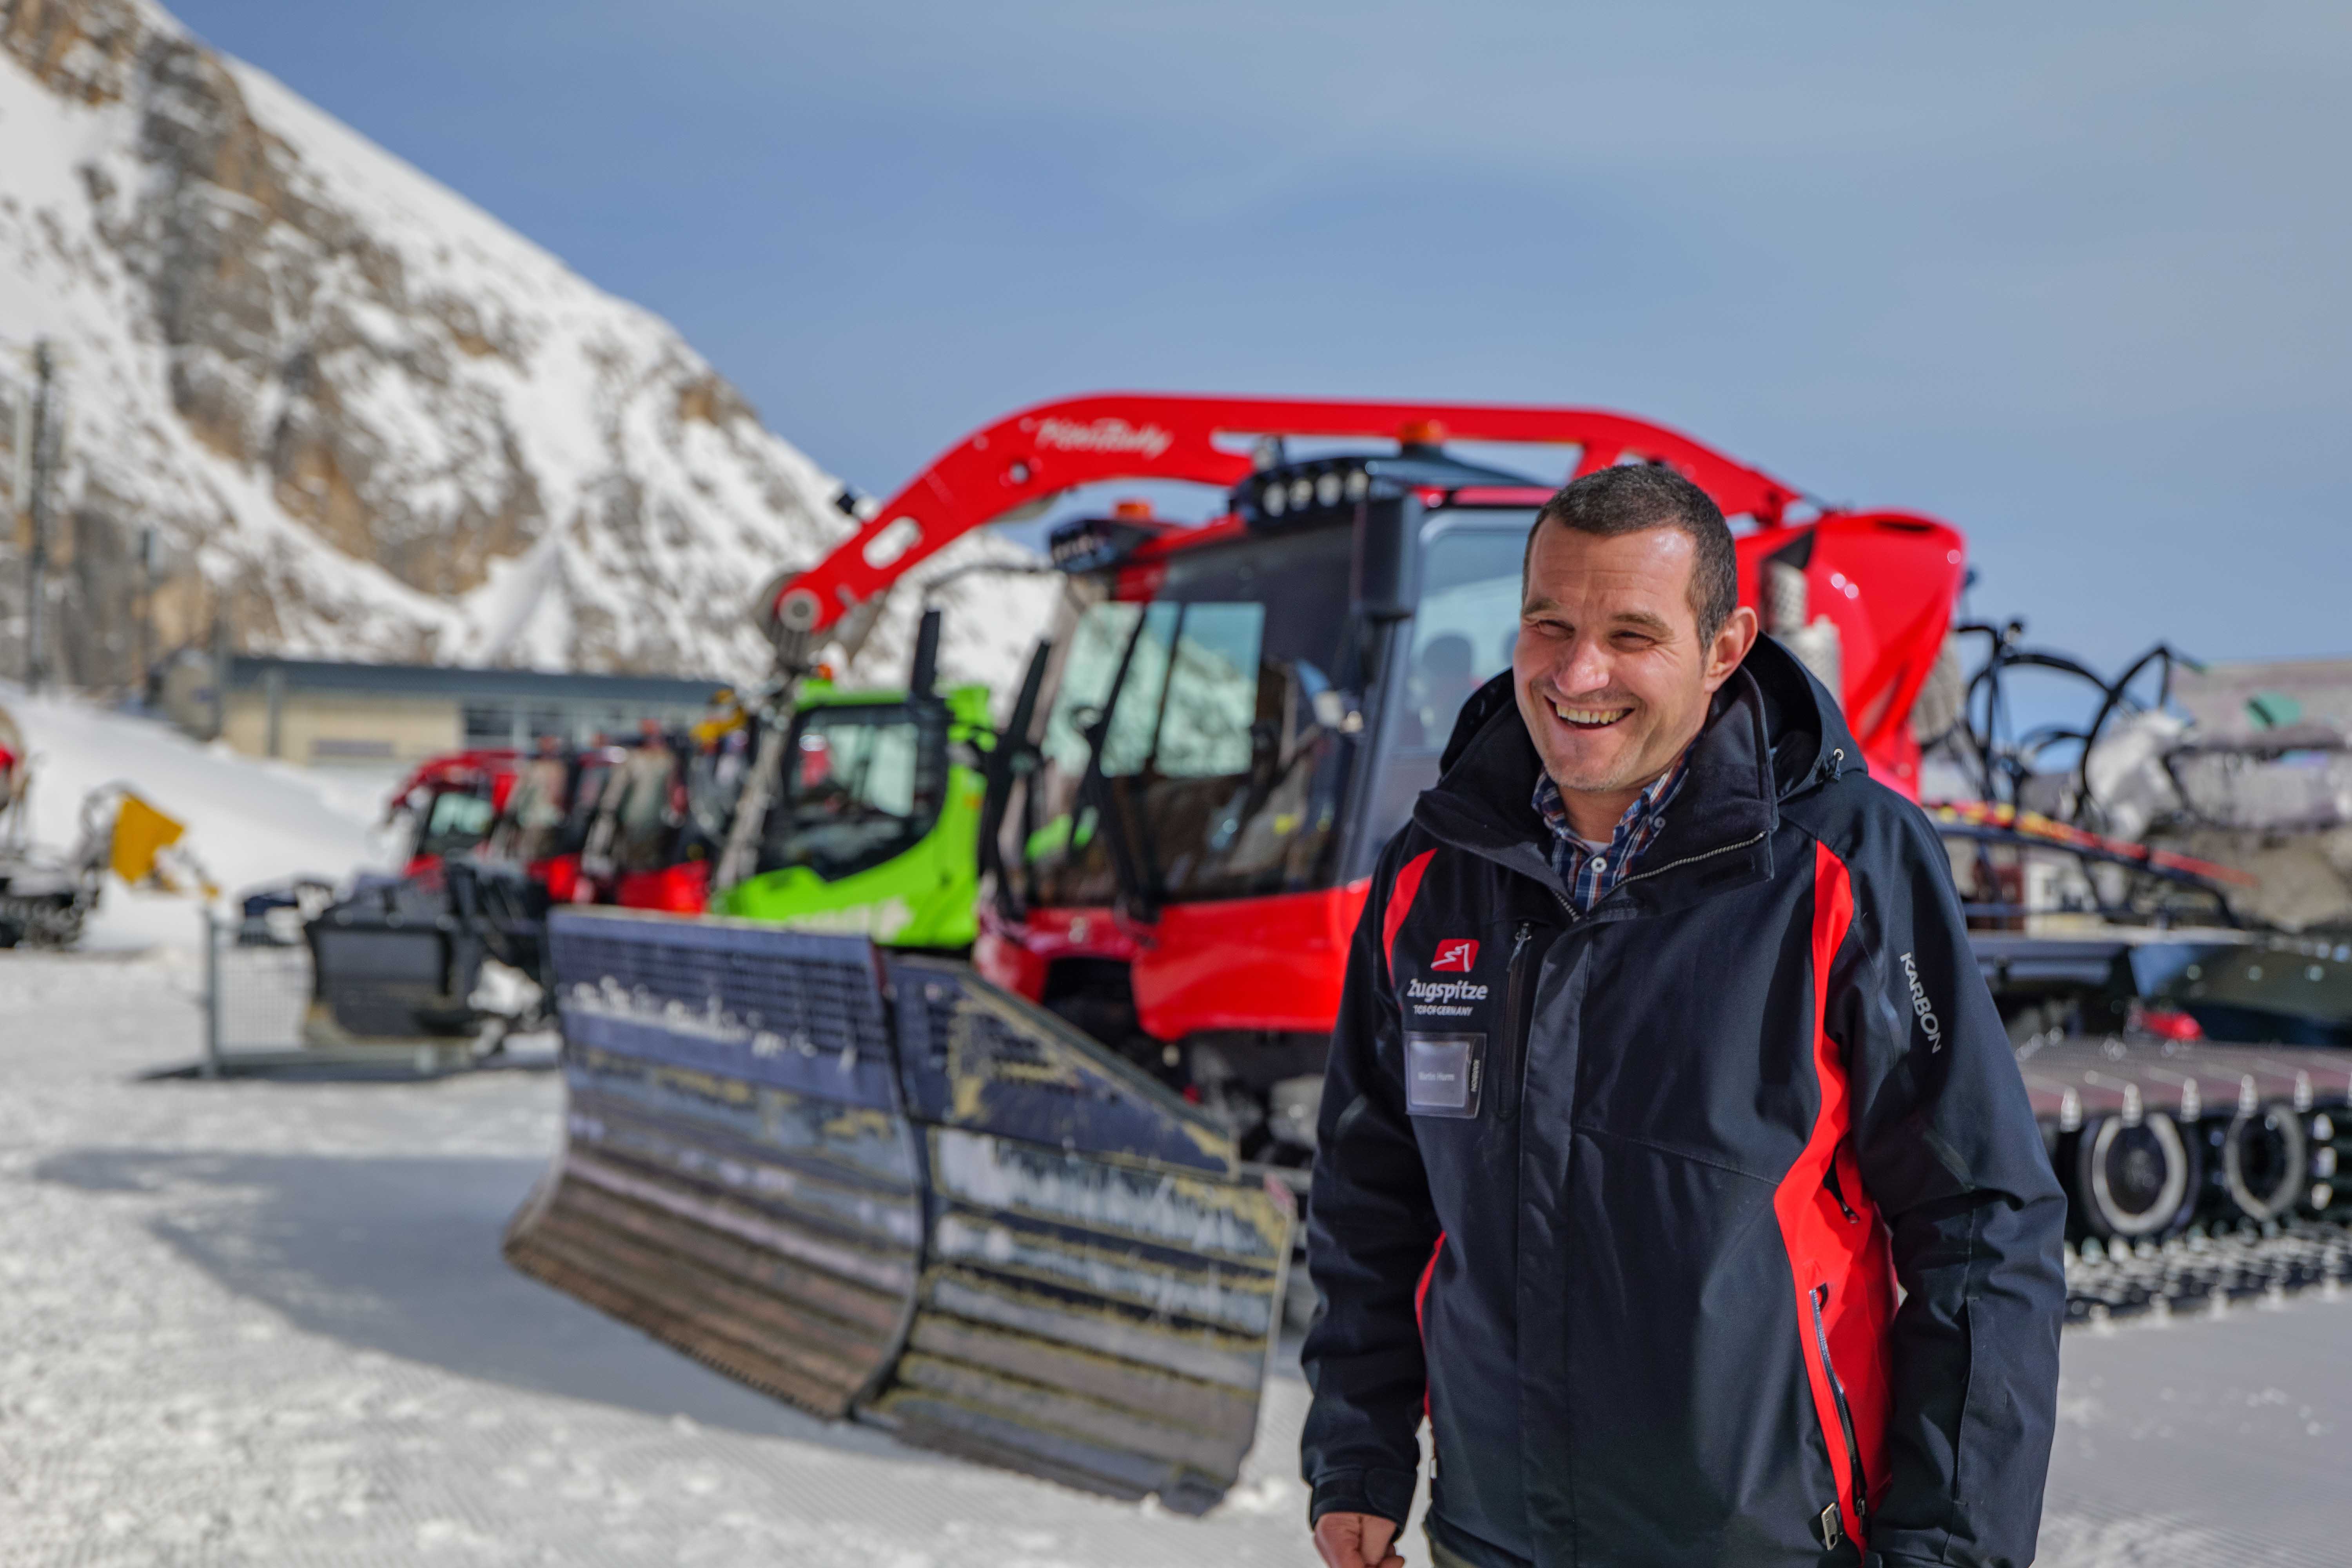 Martin Hurm, Operations Manager of Bayerische Zugspitzbahn Bergbahn AG, is already enthusiastic about the new SNOWsat solution.